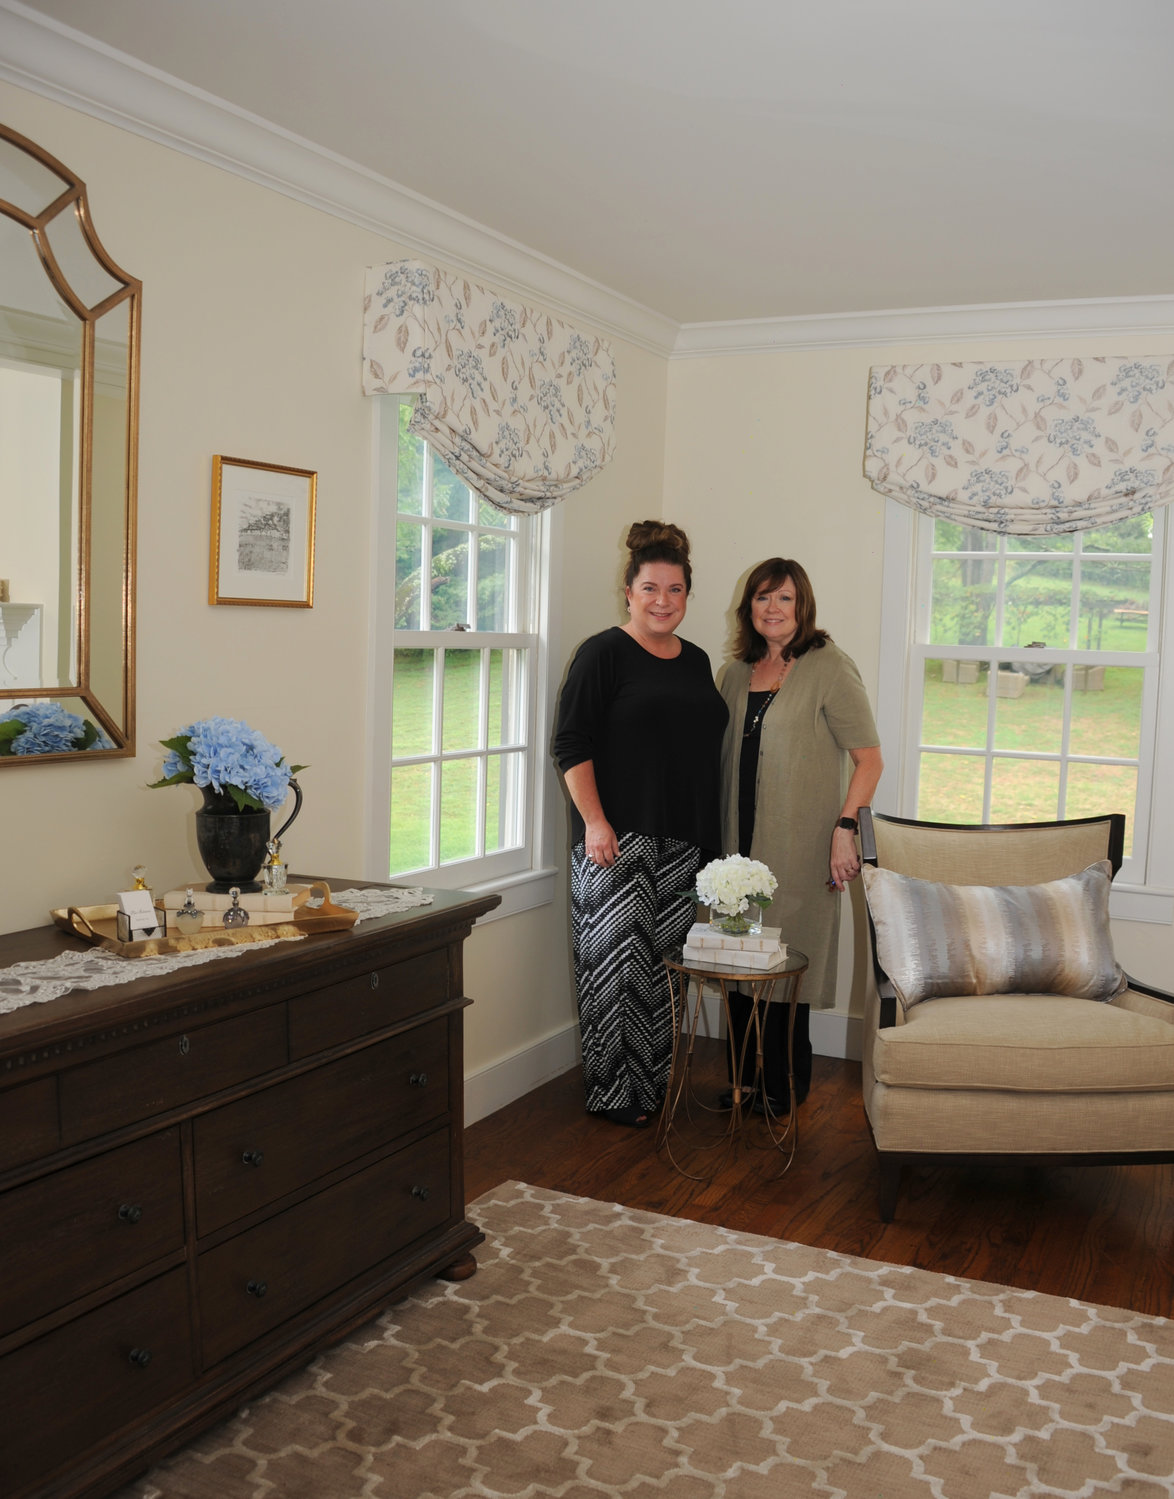 Summerby’s Master Bedroom” by Kimberly Lux of Lux Interiors and Mary Cardinale of Bucks County Window Décor.